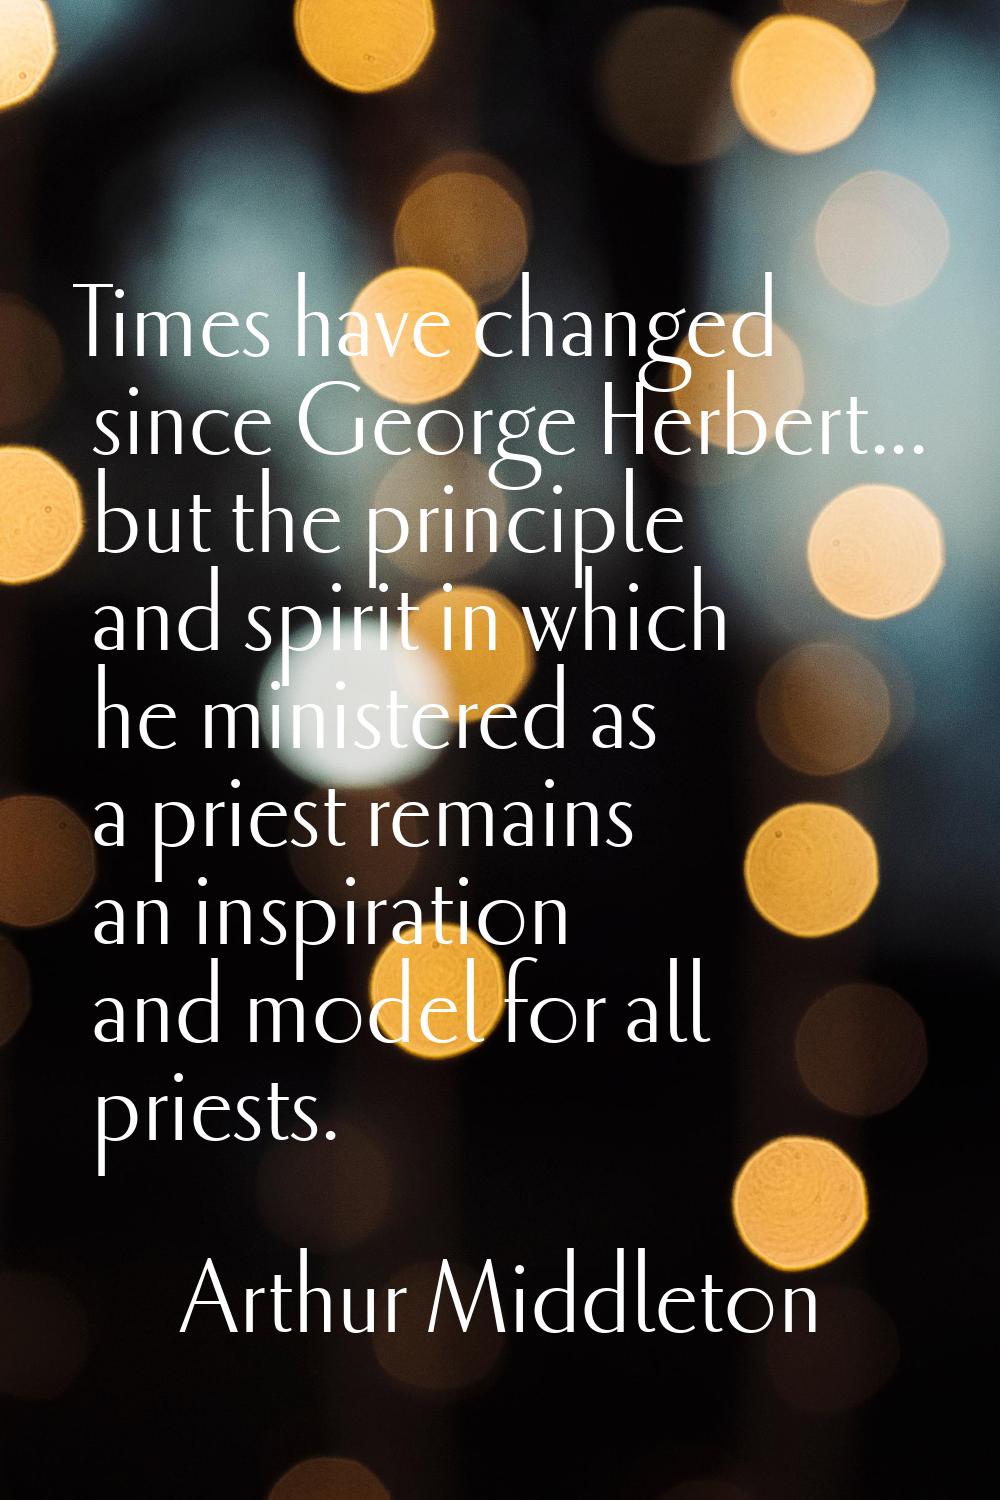 Times have changed since George Herbert... but the principle and spirit in which he ministered as a